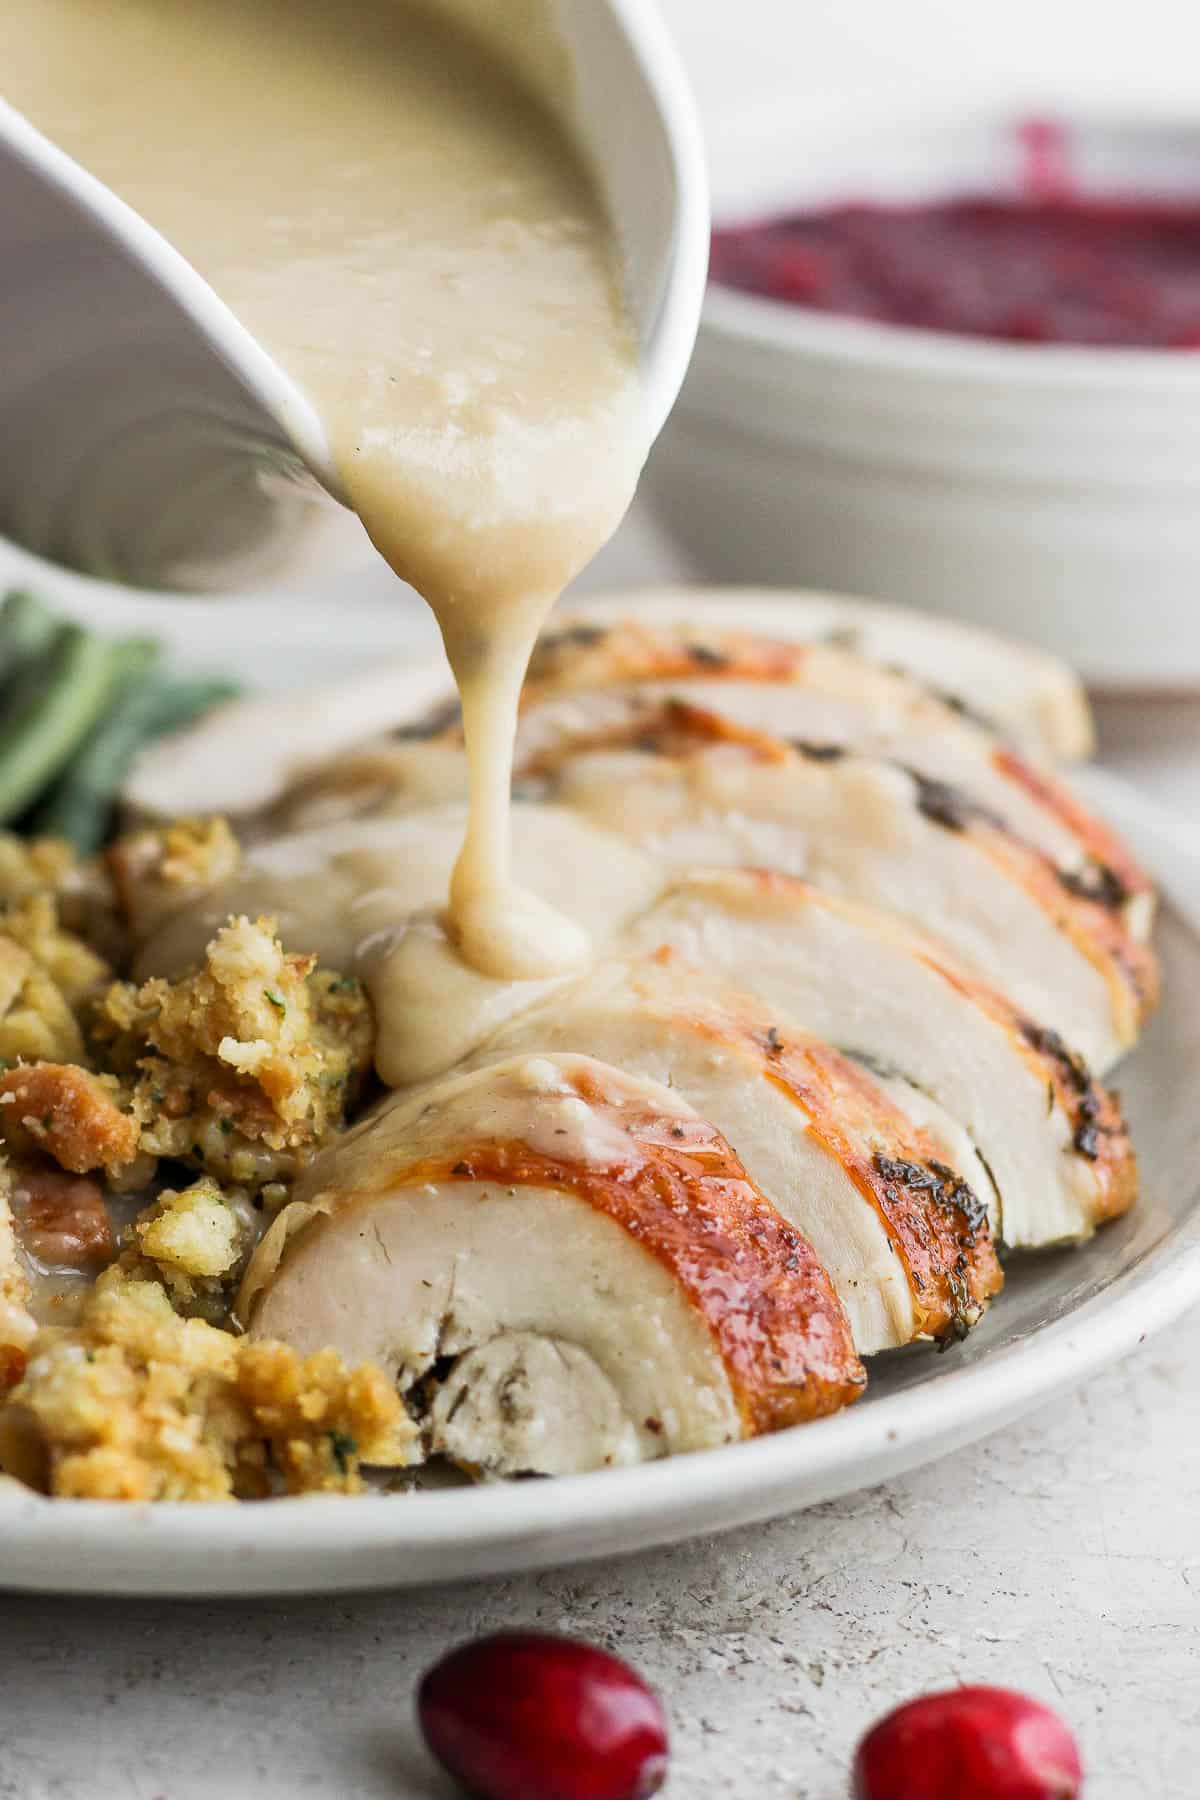 Someone pouring giblet gravy over sliced turkey breast on a plate next to stuffing.